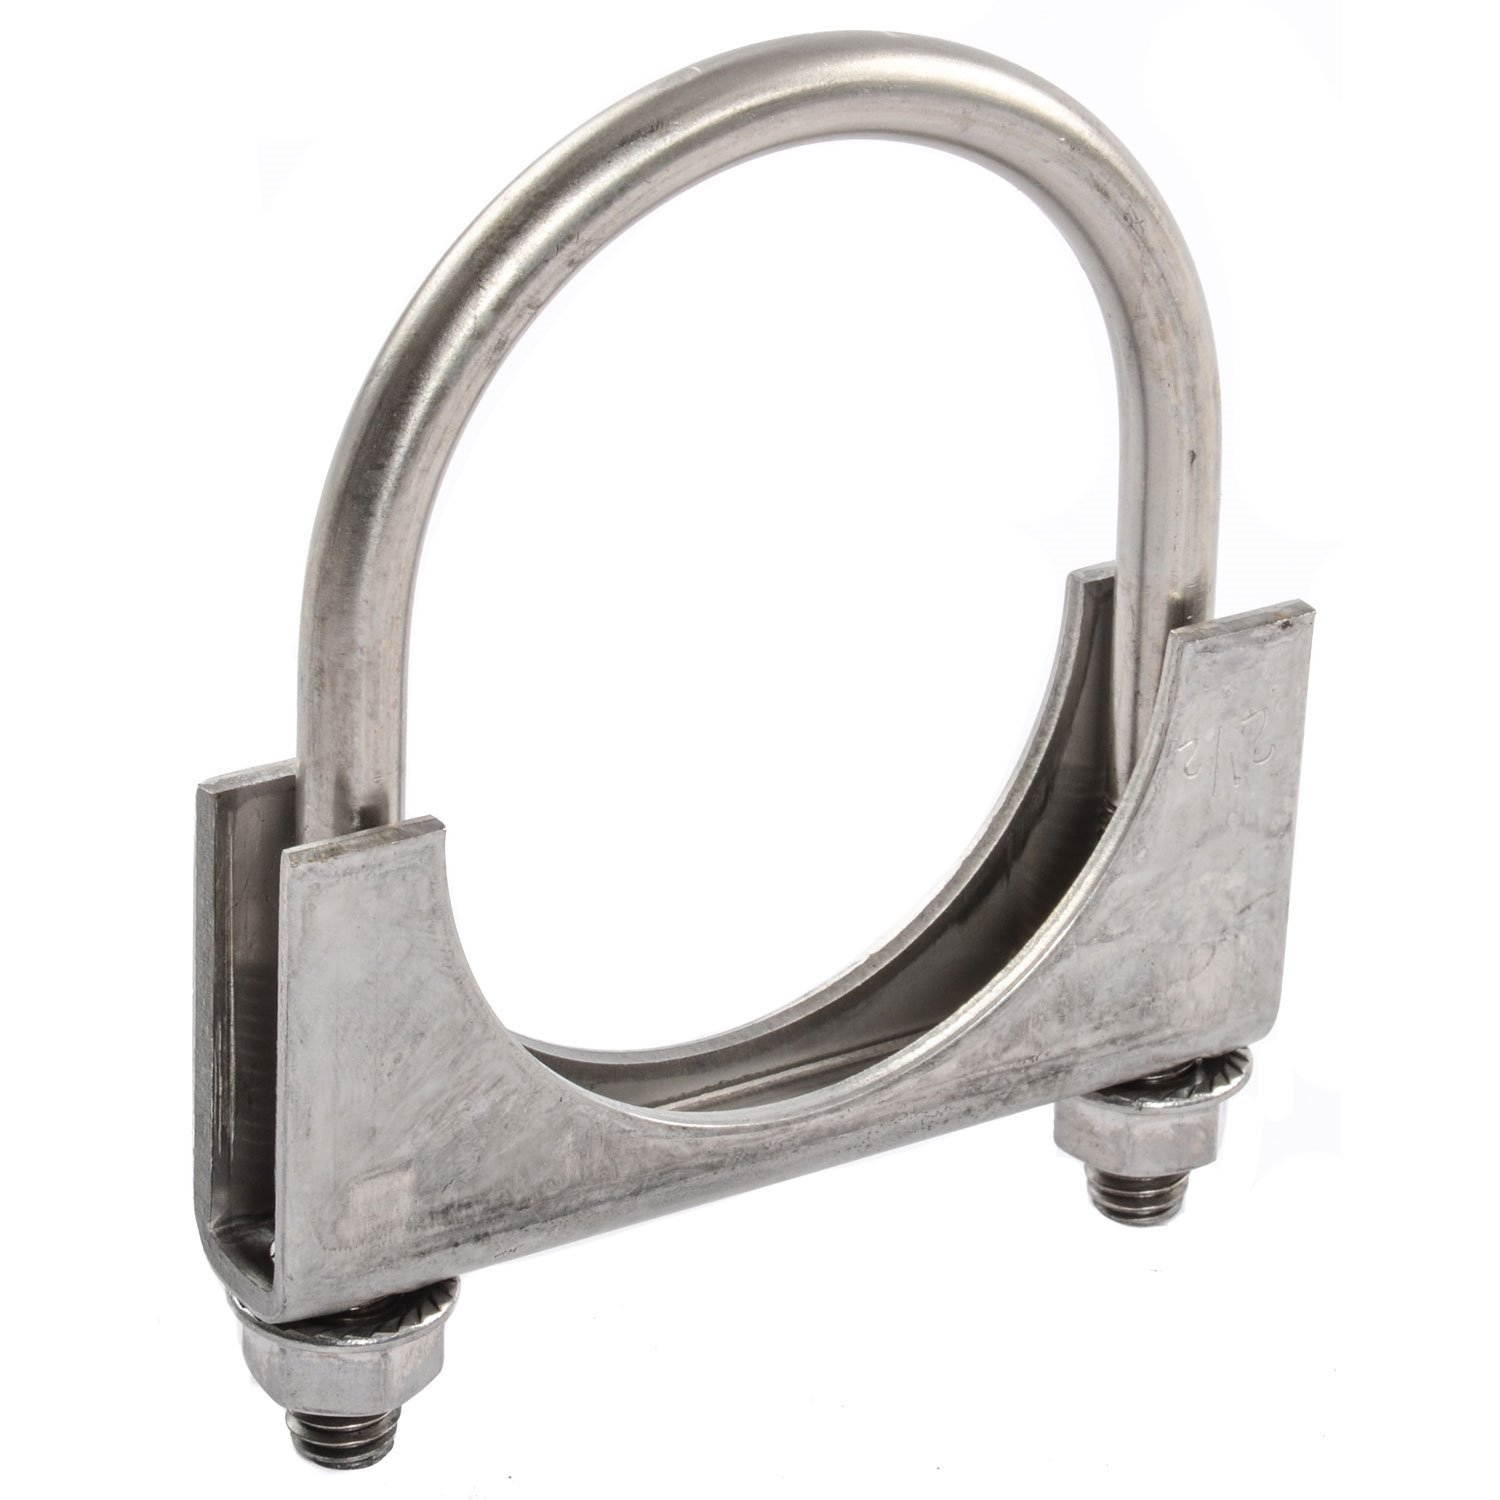 Stainless Steel HD U-Clamp for 2-1/2" OD Pipe